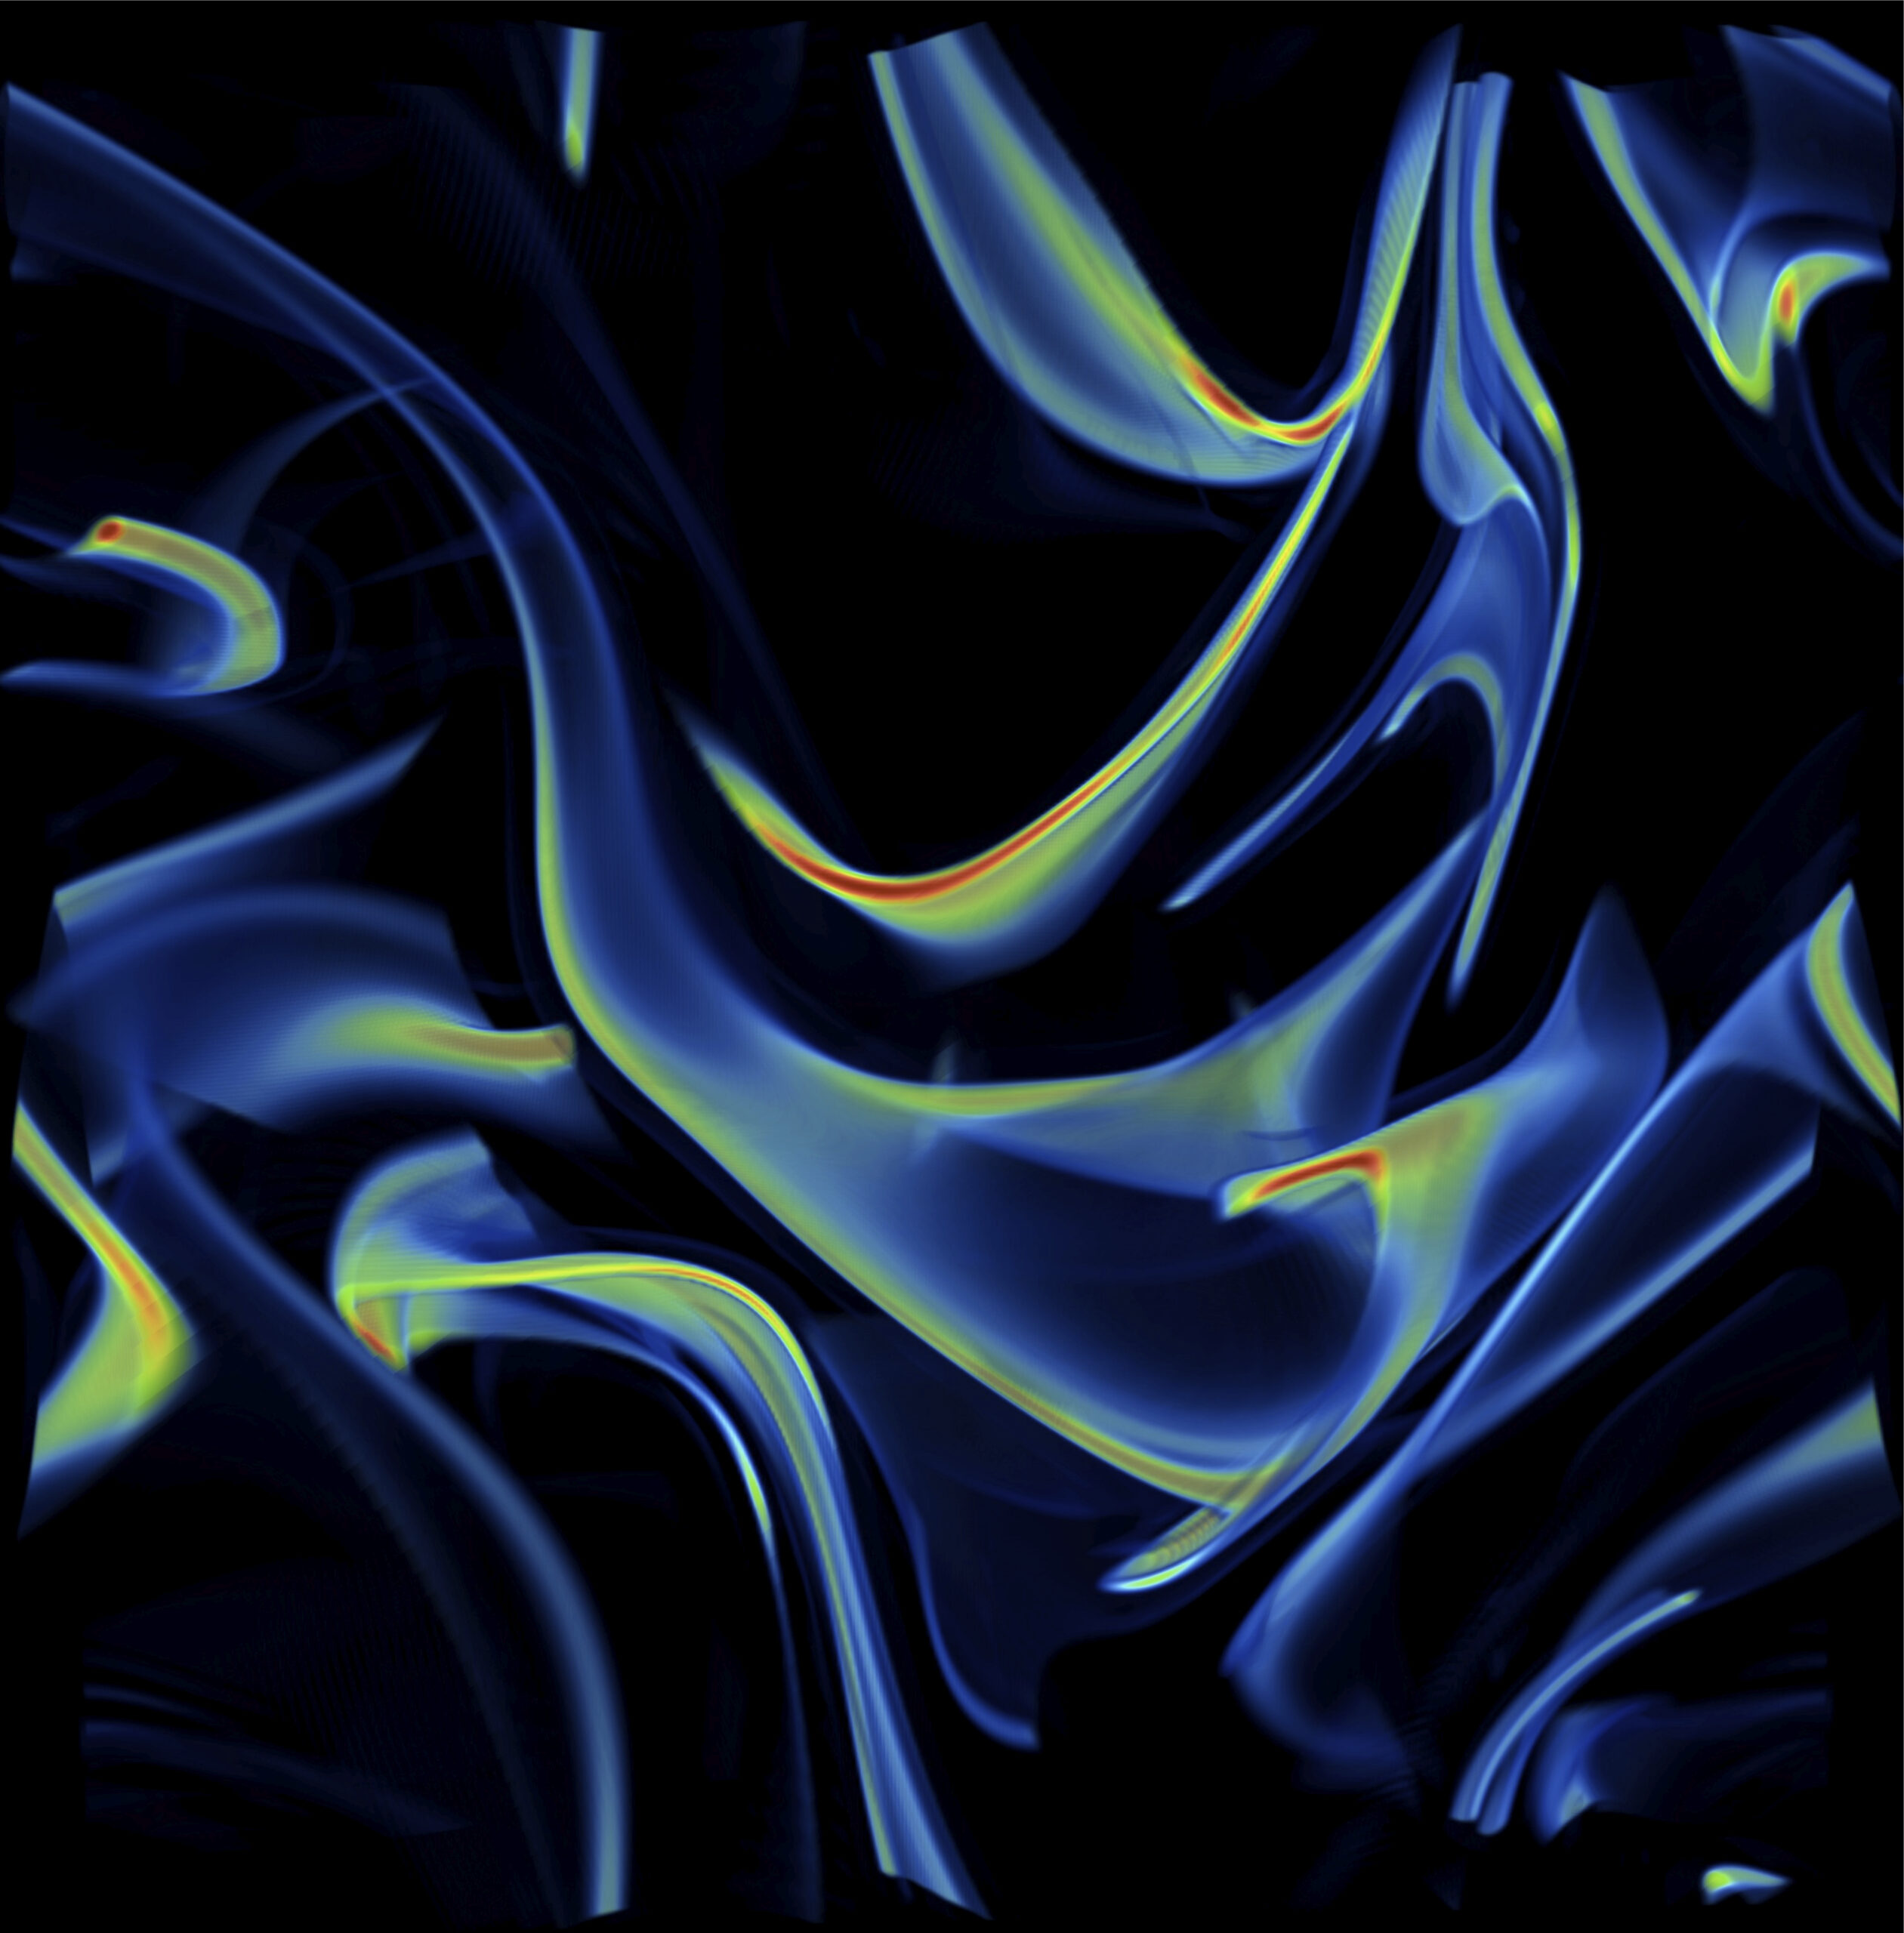 Chemotaxis in turbulence